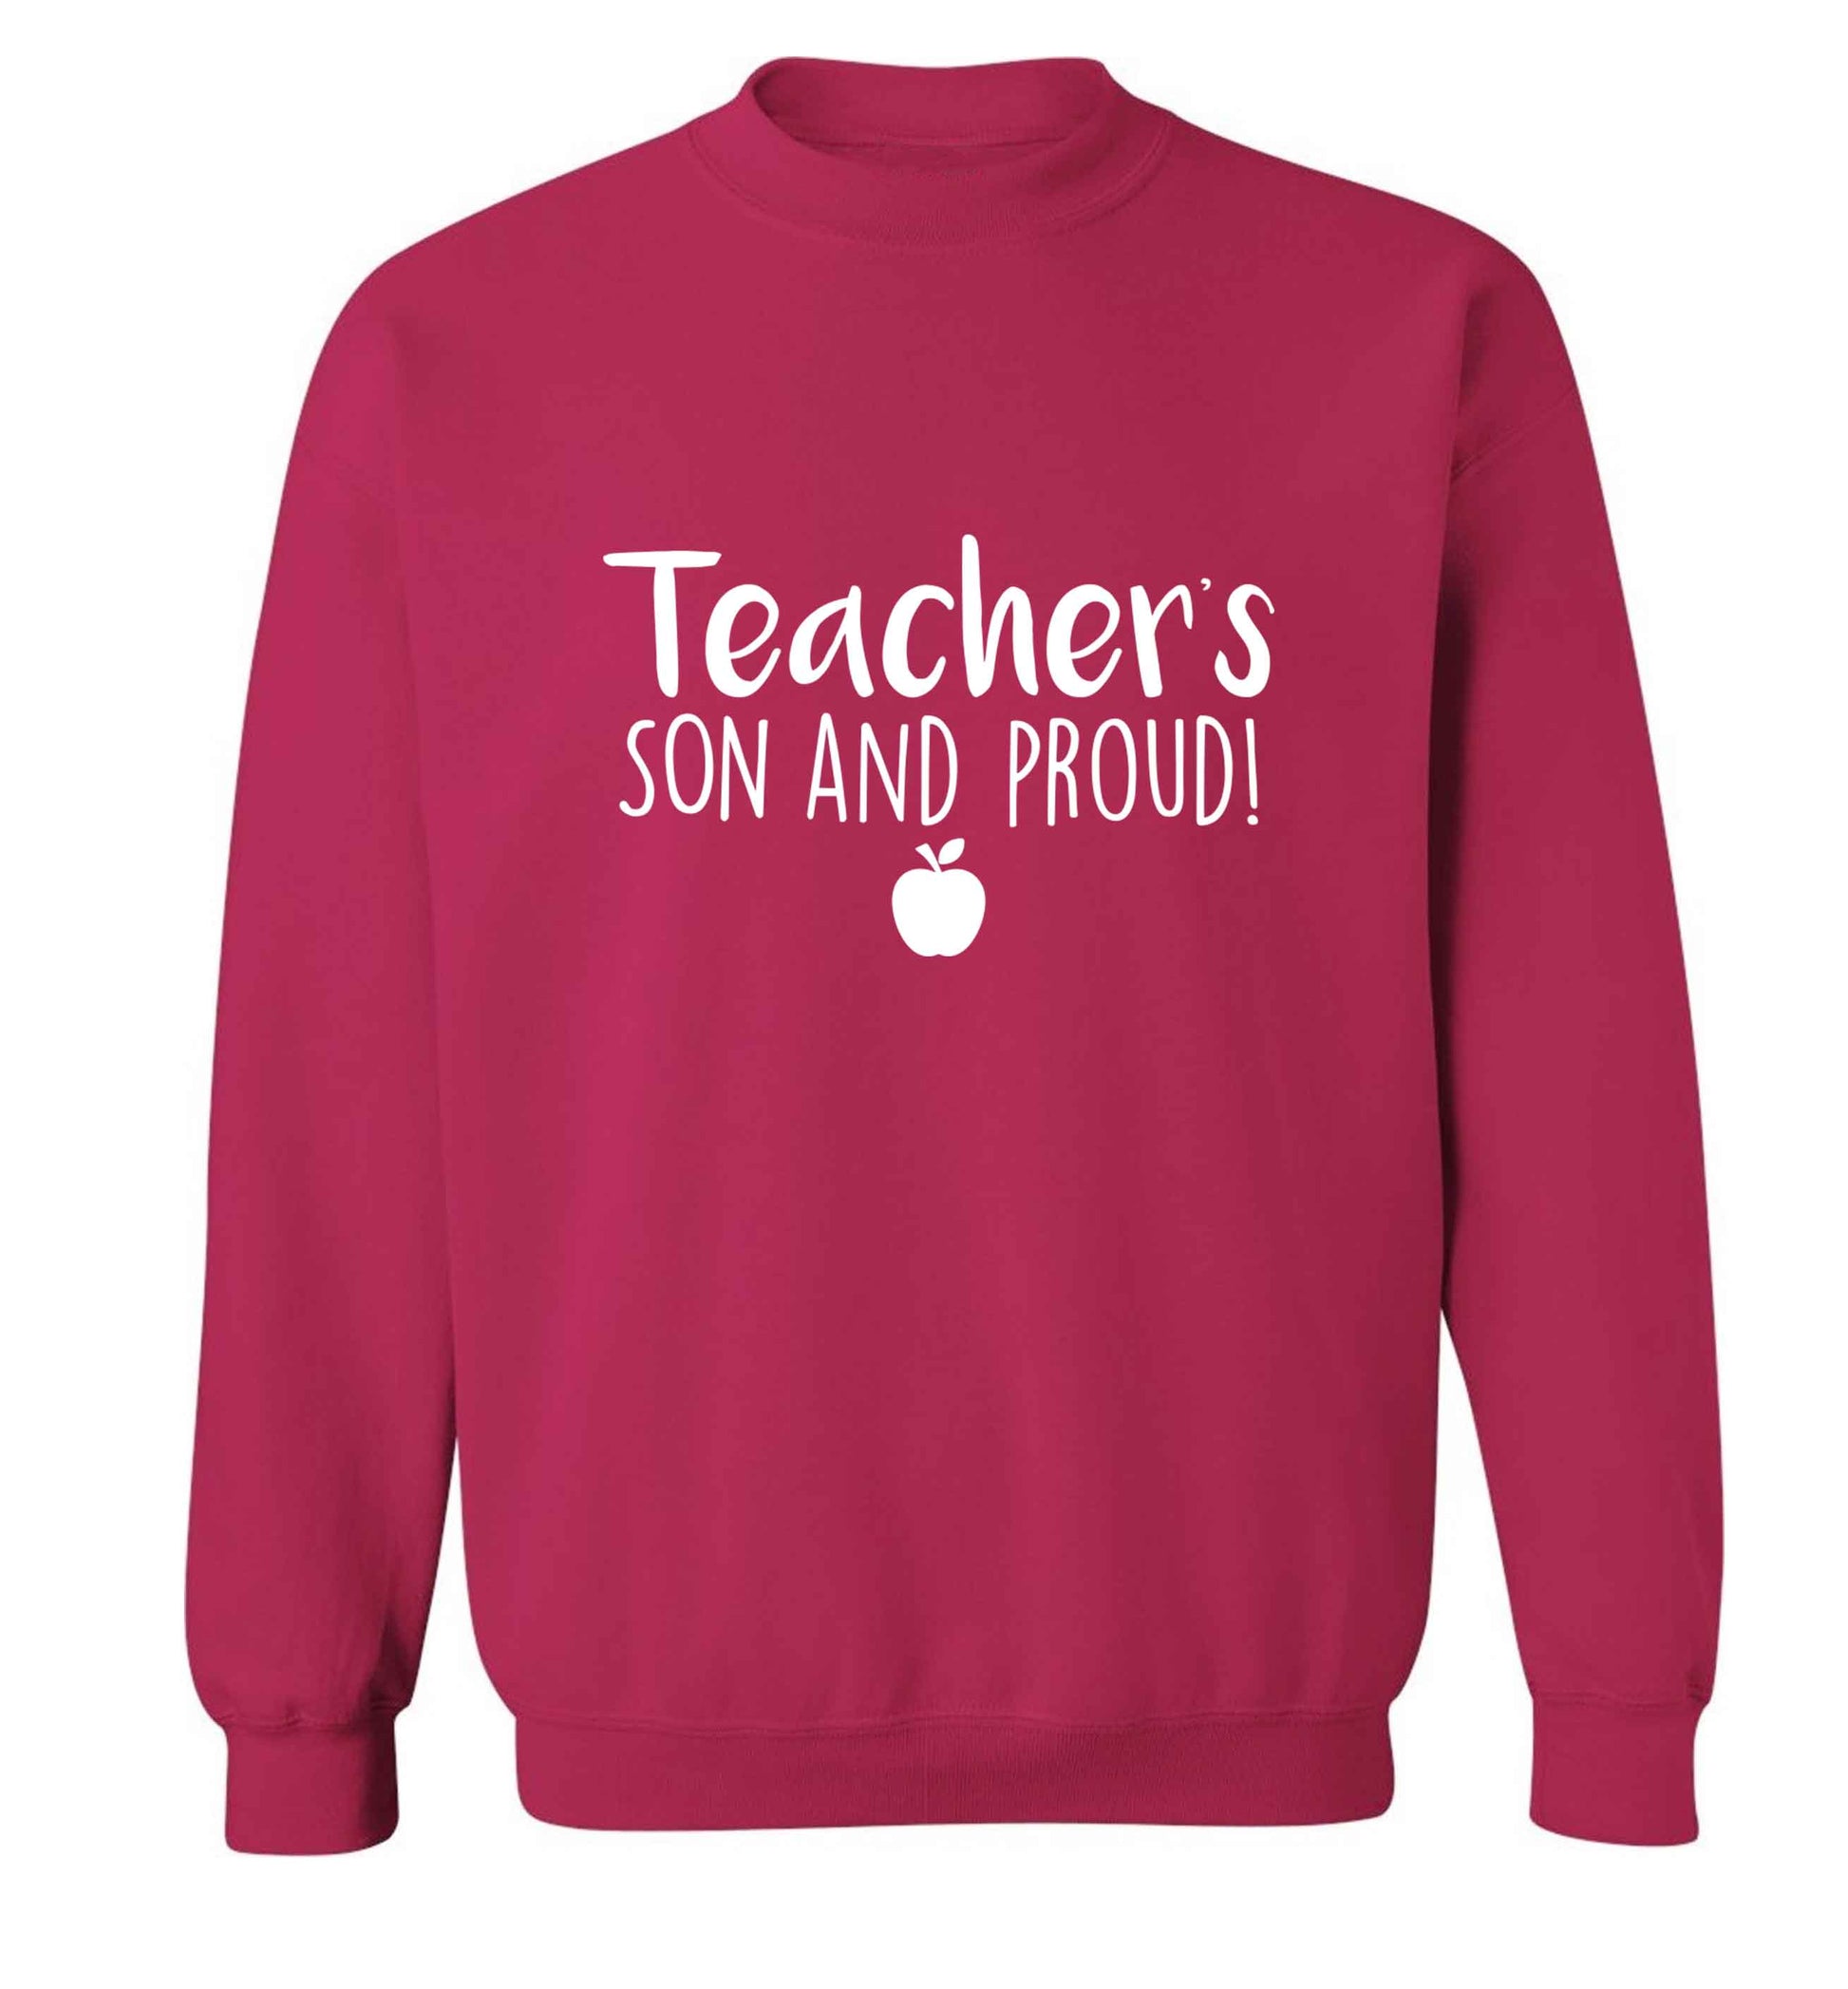 Teachers son and proud adult's unisex pink sweater 2XL